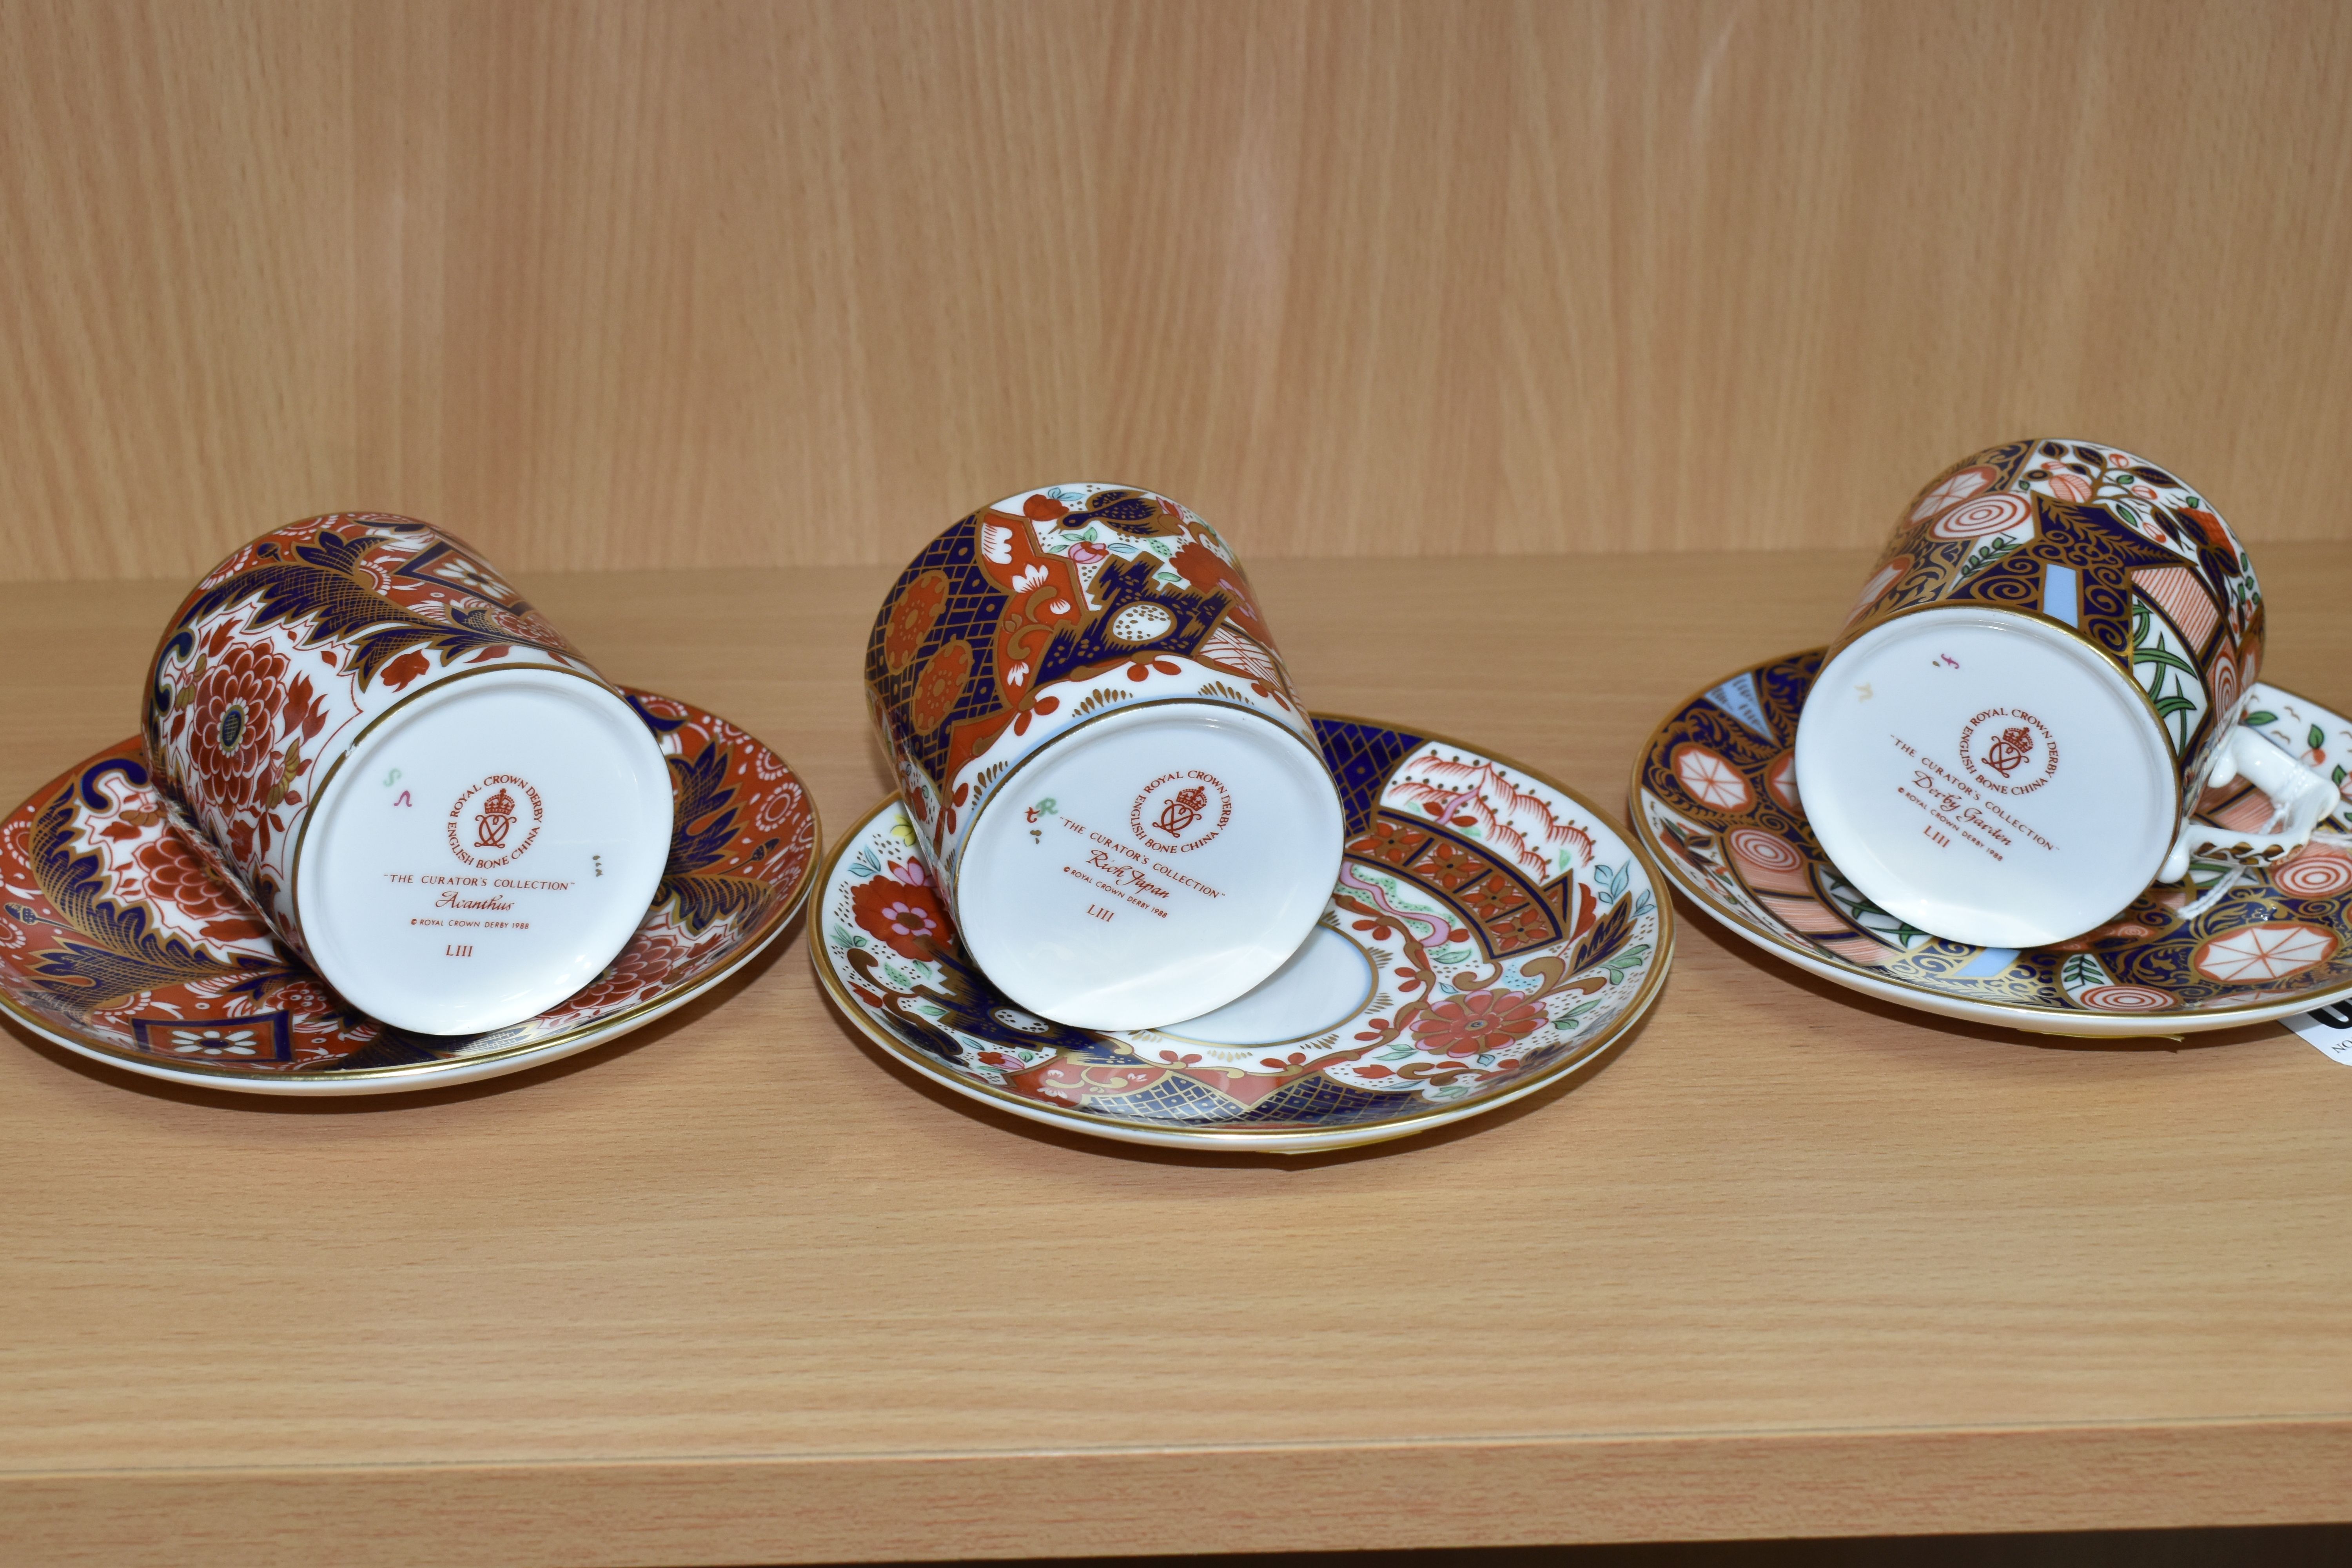 THREE ROYAL CROWN DERBY COFFEE CANS AND SAUCERS, from 'The Curator's Collection' in Rich Japan, - Image 2 of 5